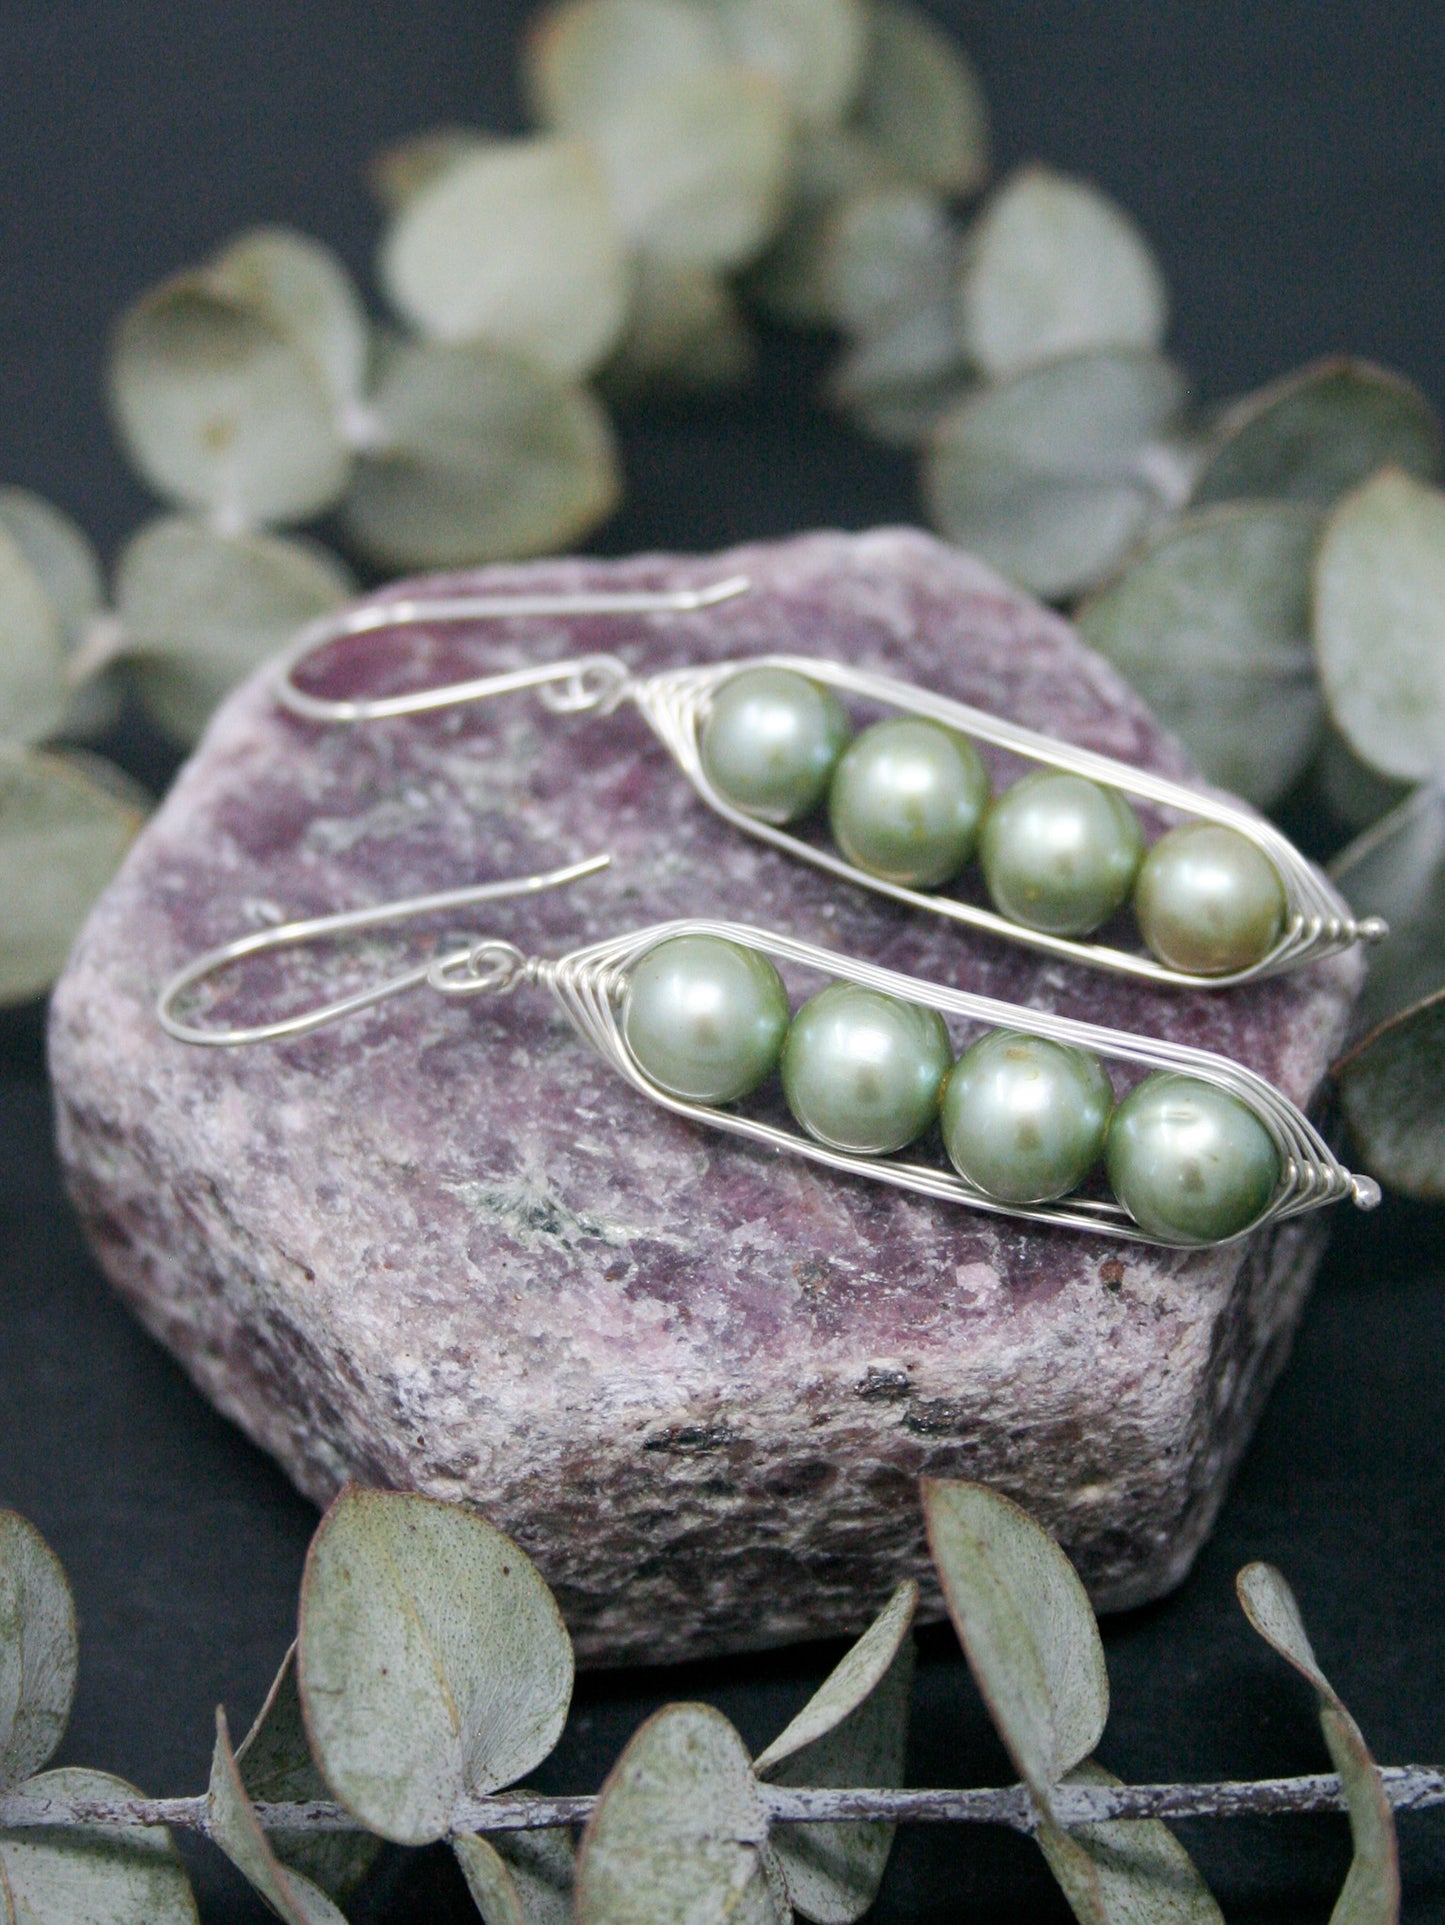 Four peas in a pod earrings [made to order]